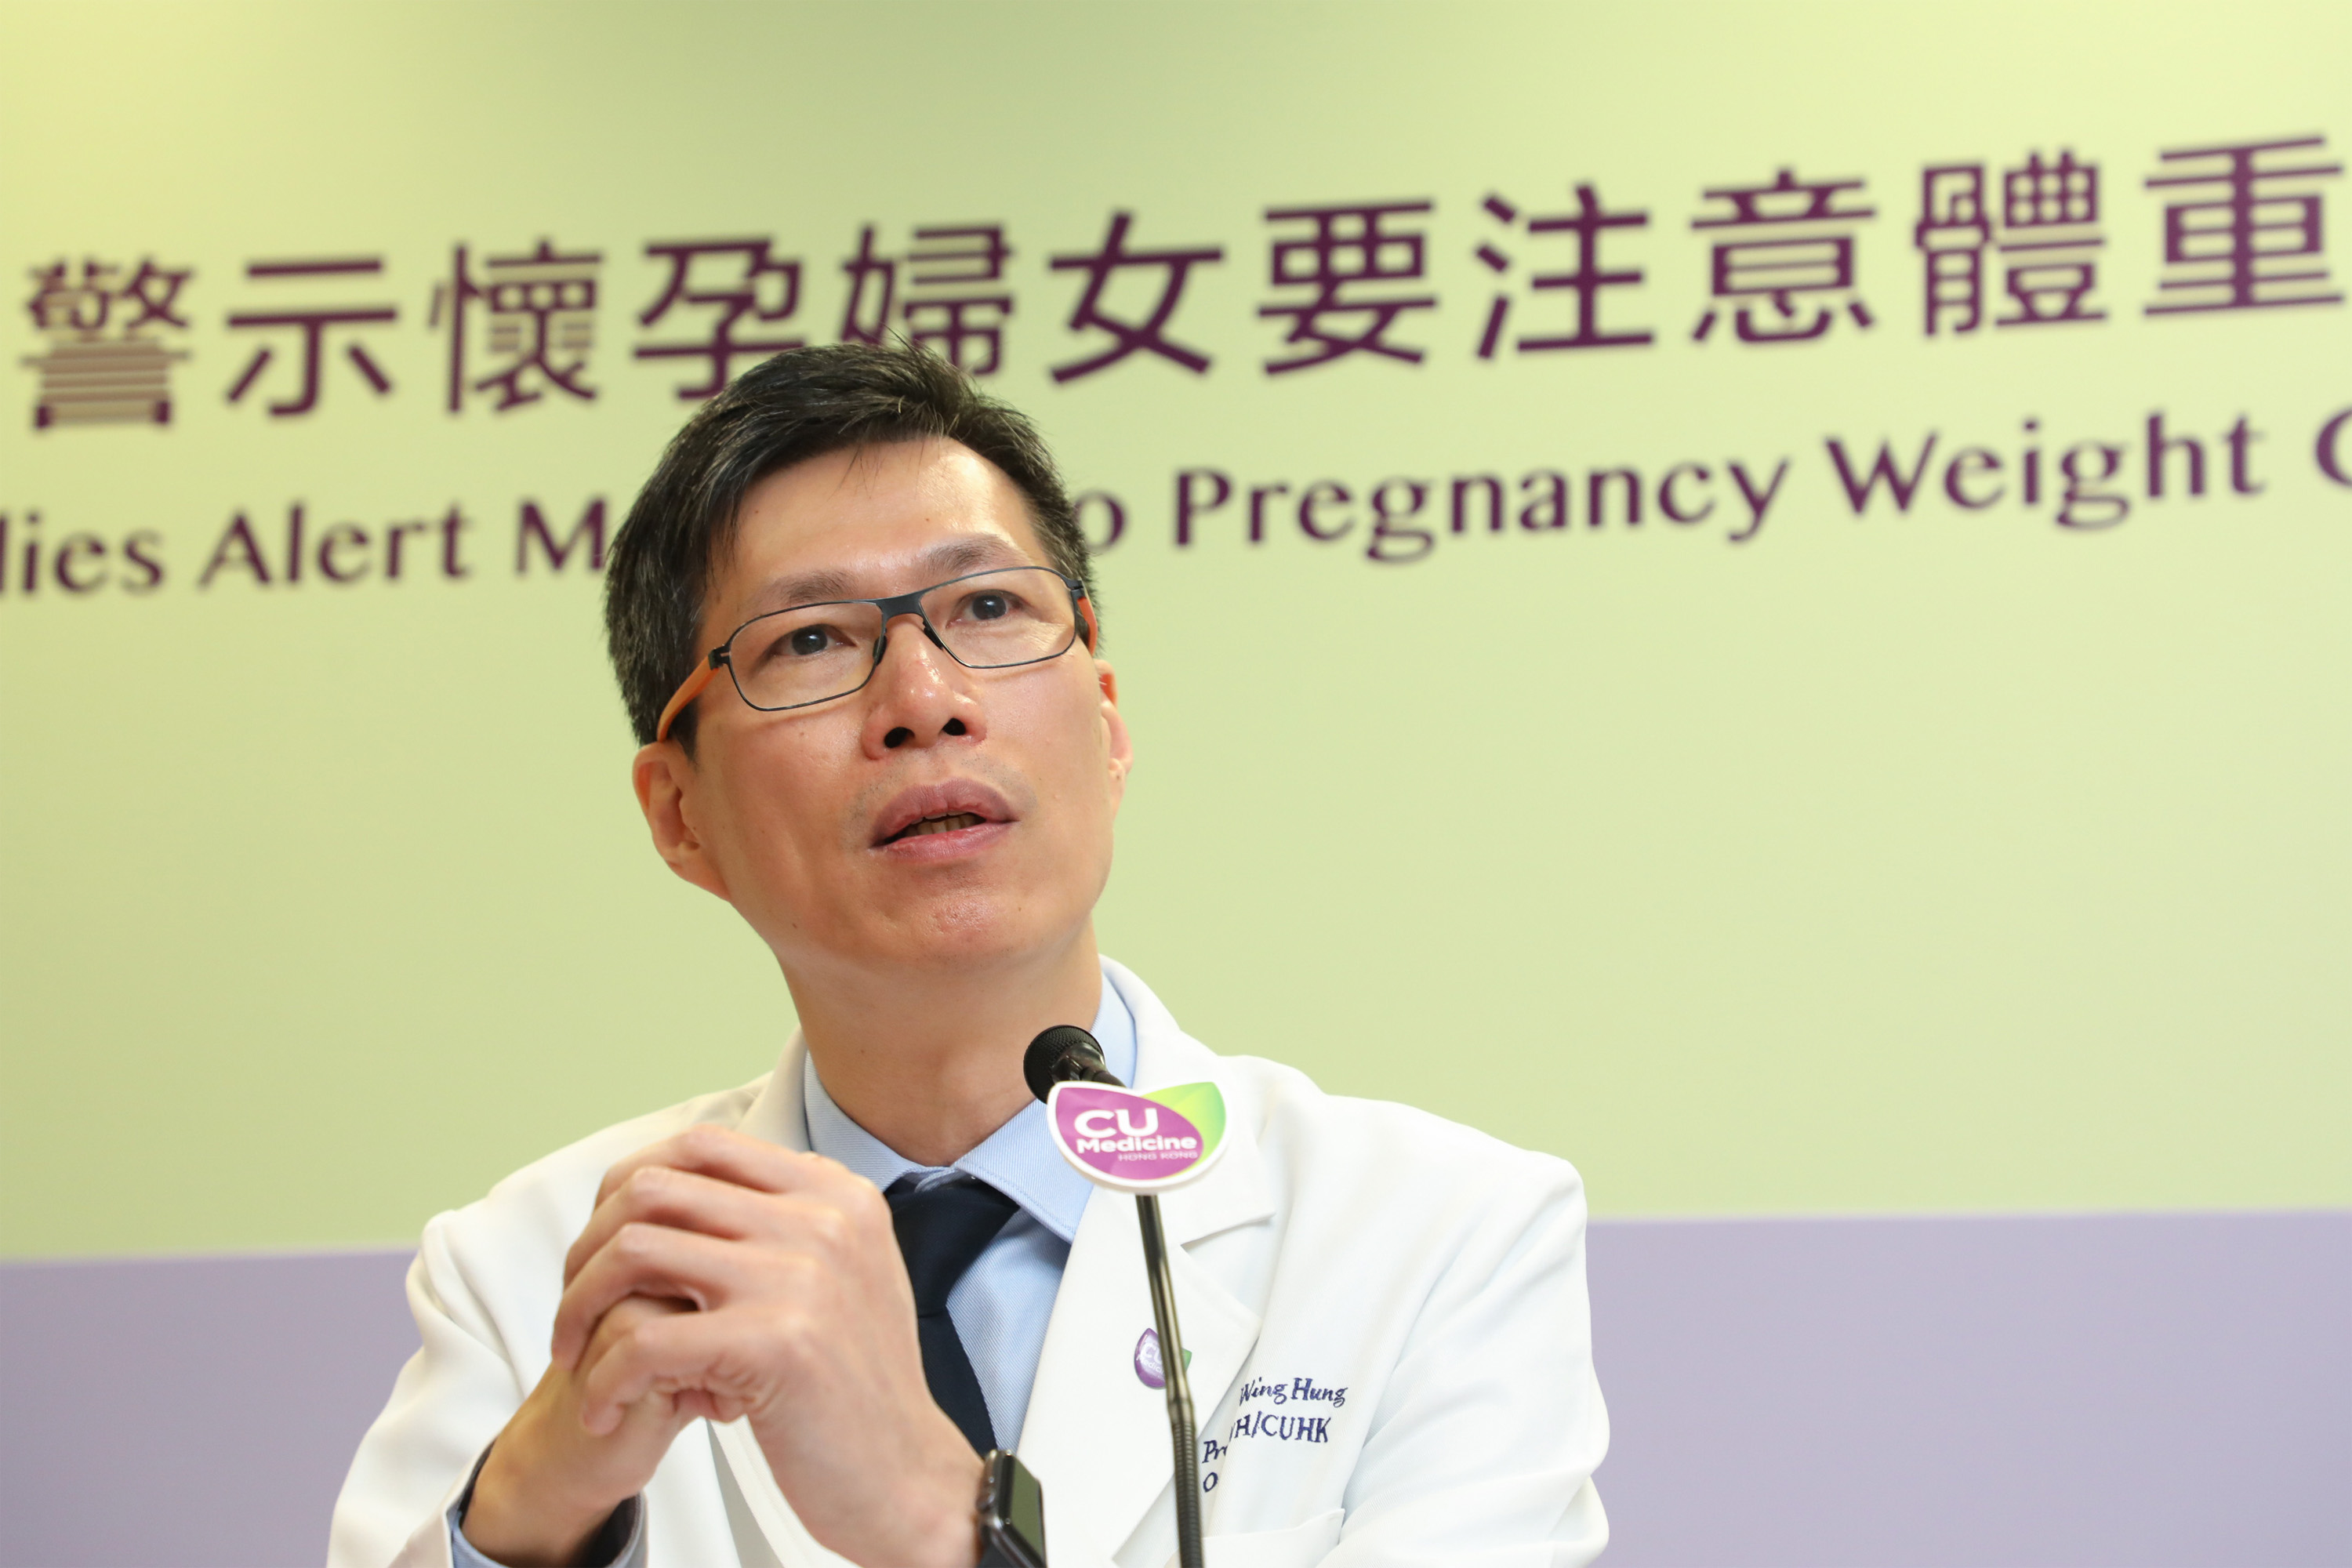 Professor Wing Hung TAM says the team will continue to investigate the effects of “gestational weight gain” and “gestational diabetes mellitus” on the different stages of child development